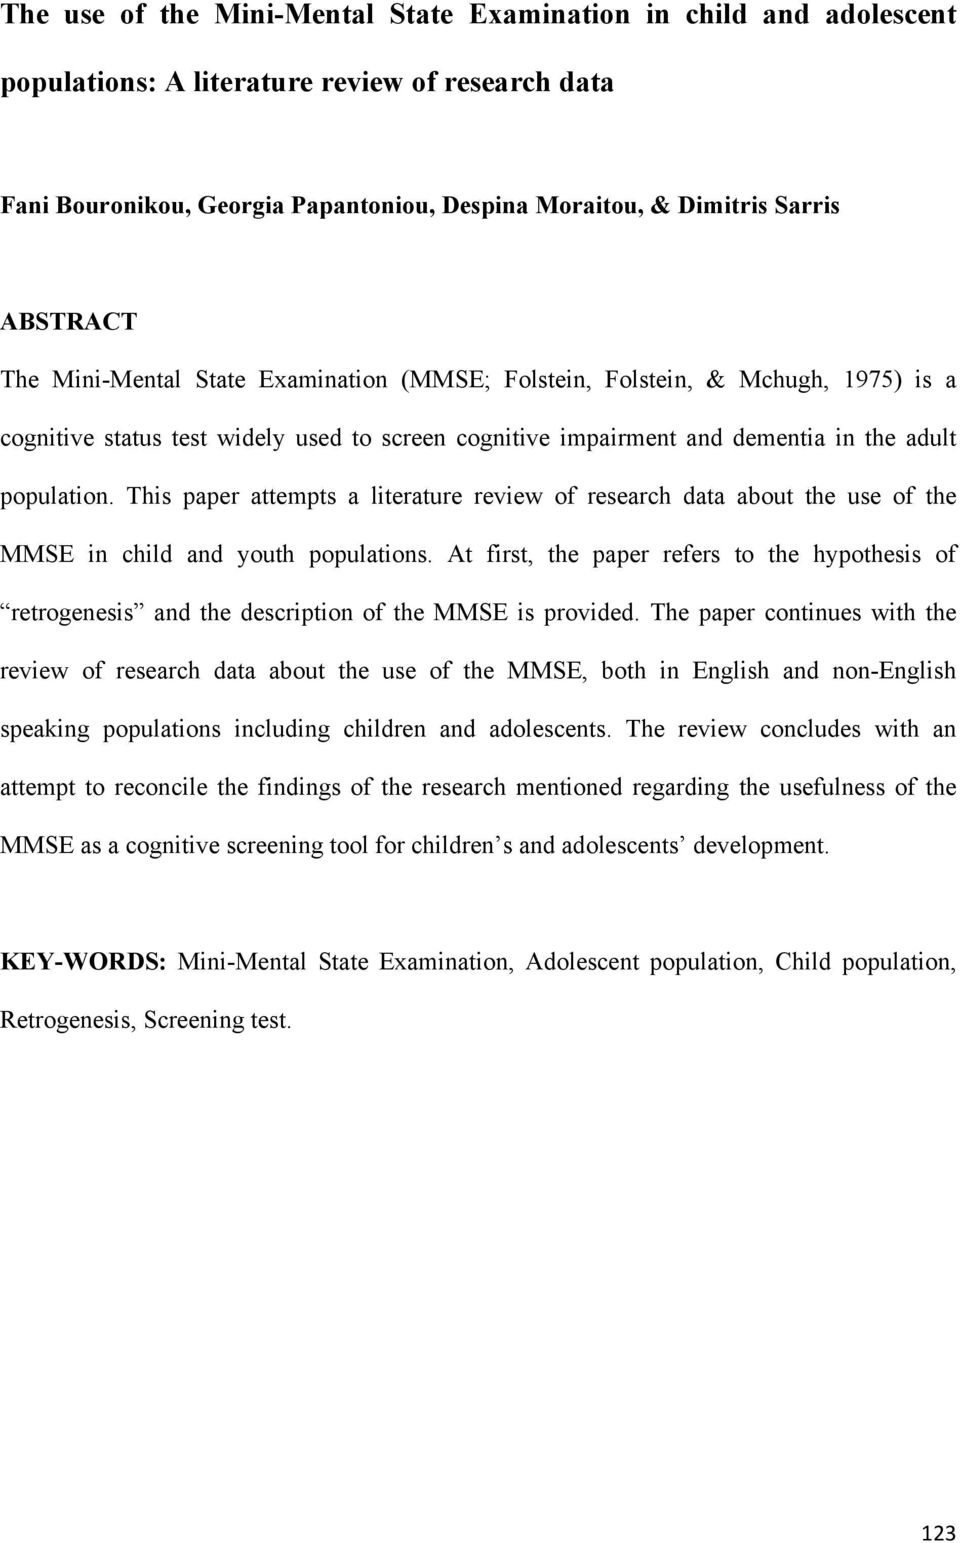 This paper attempts a literature review of research data about the use of the MMSE in child and youth populations.